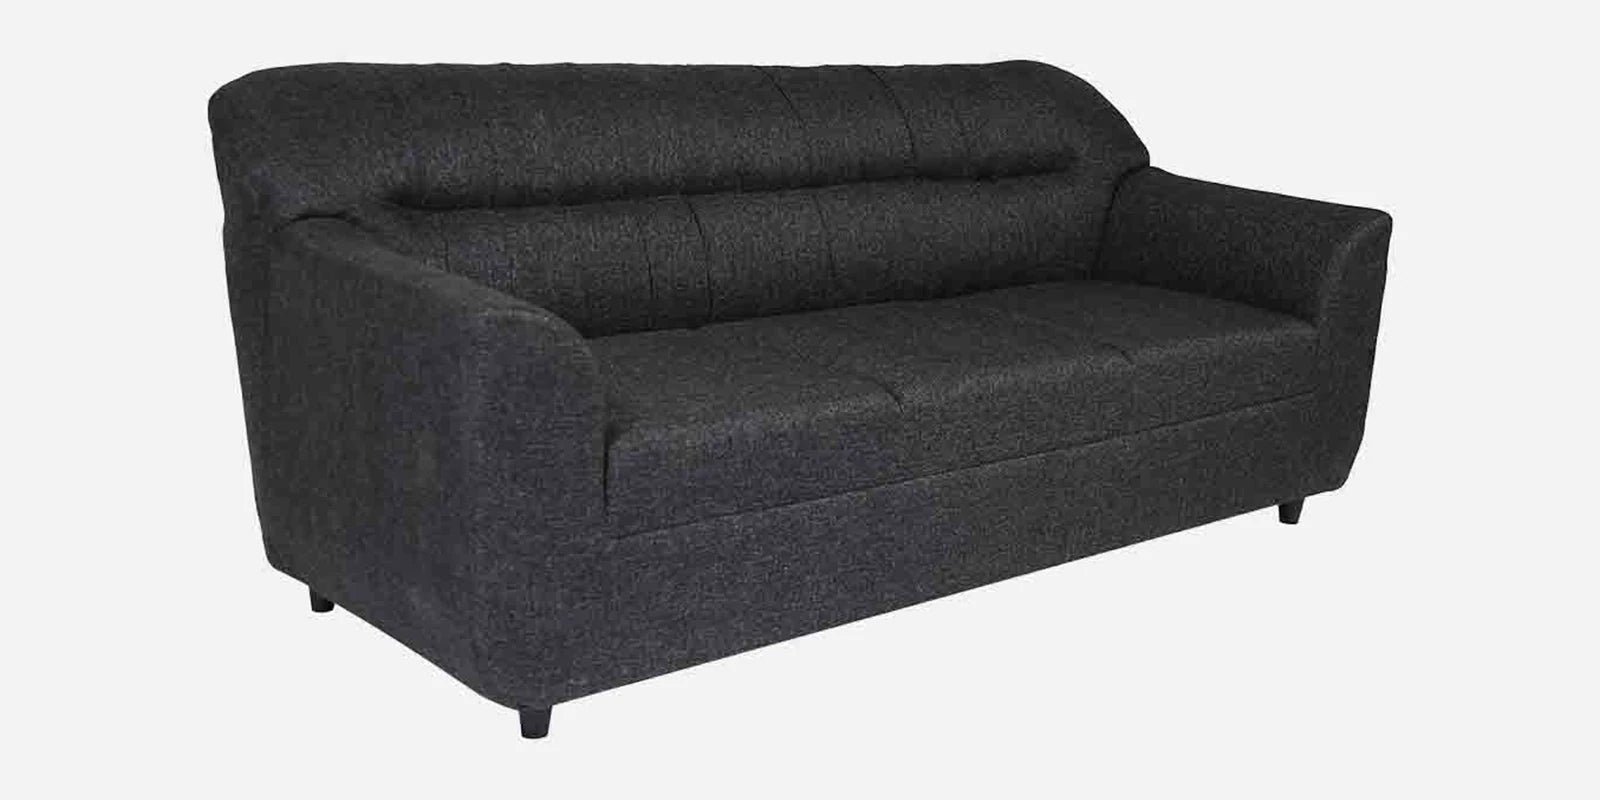 Fabric 3 Seater Sofa in Charcoal Grey Colour